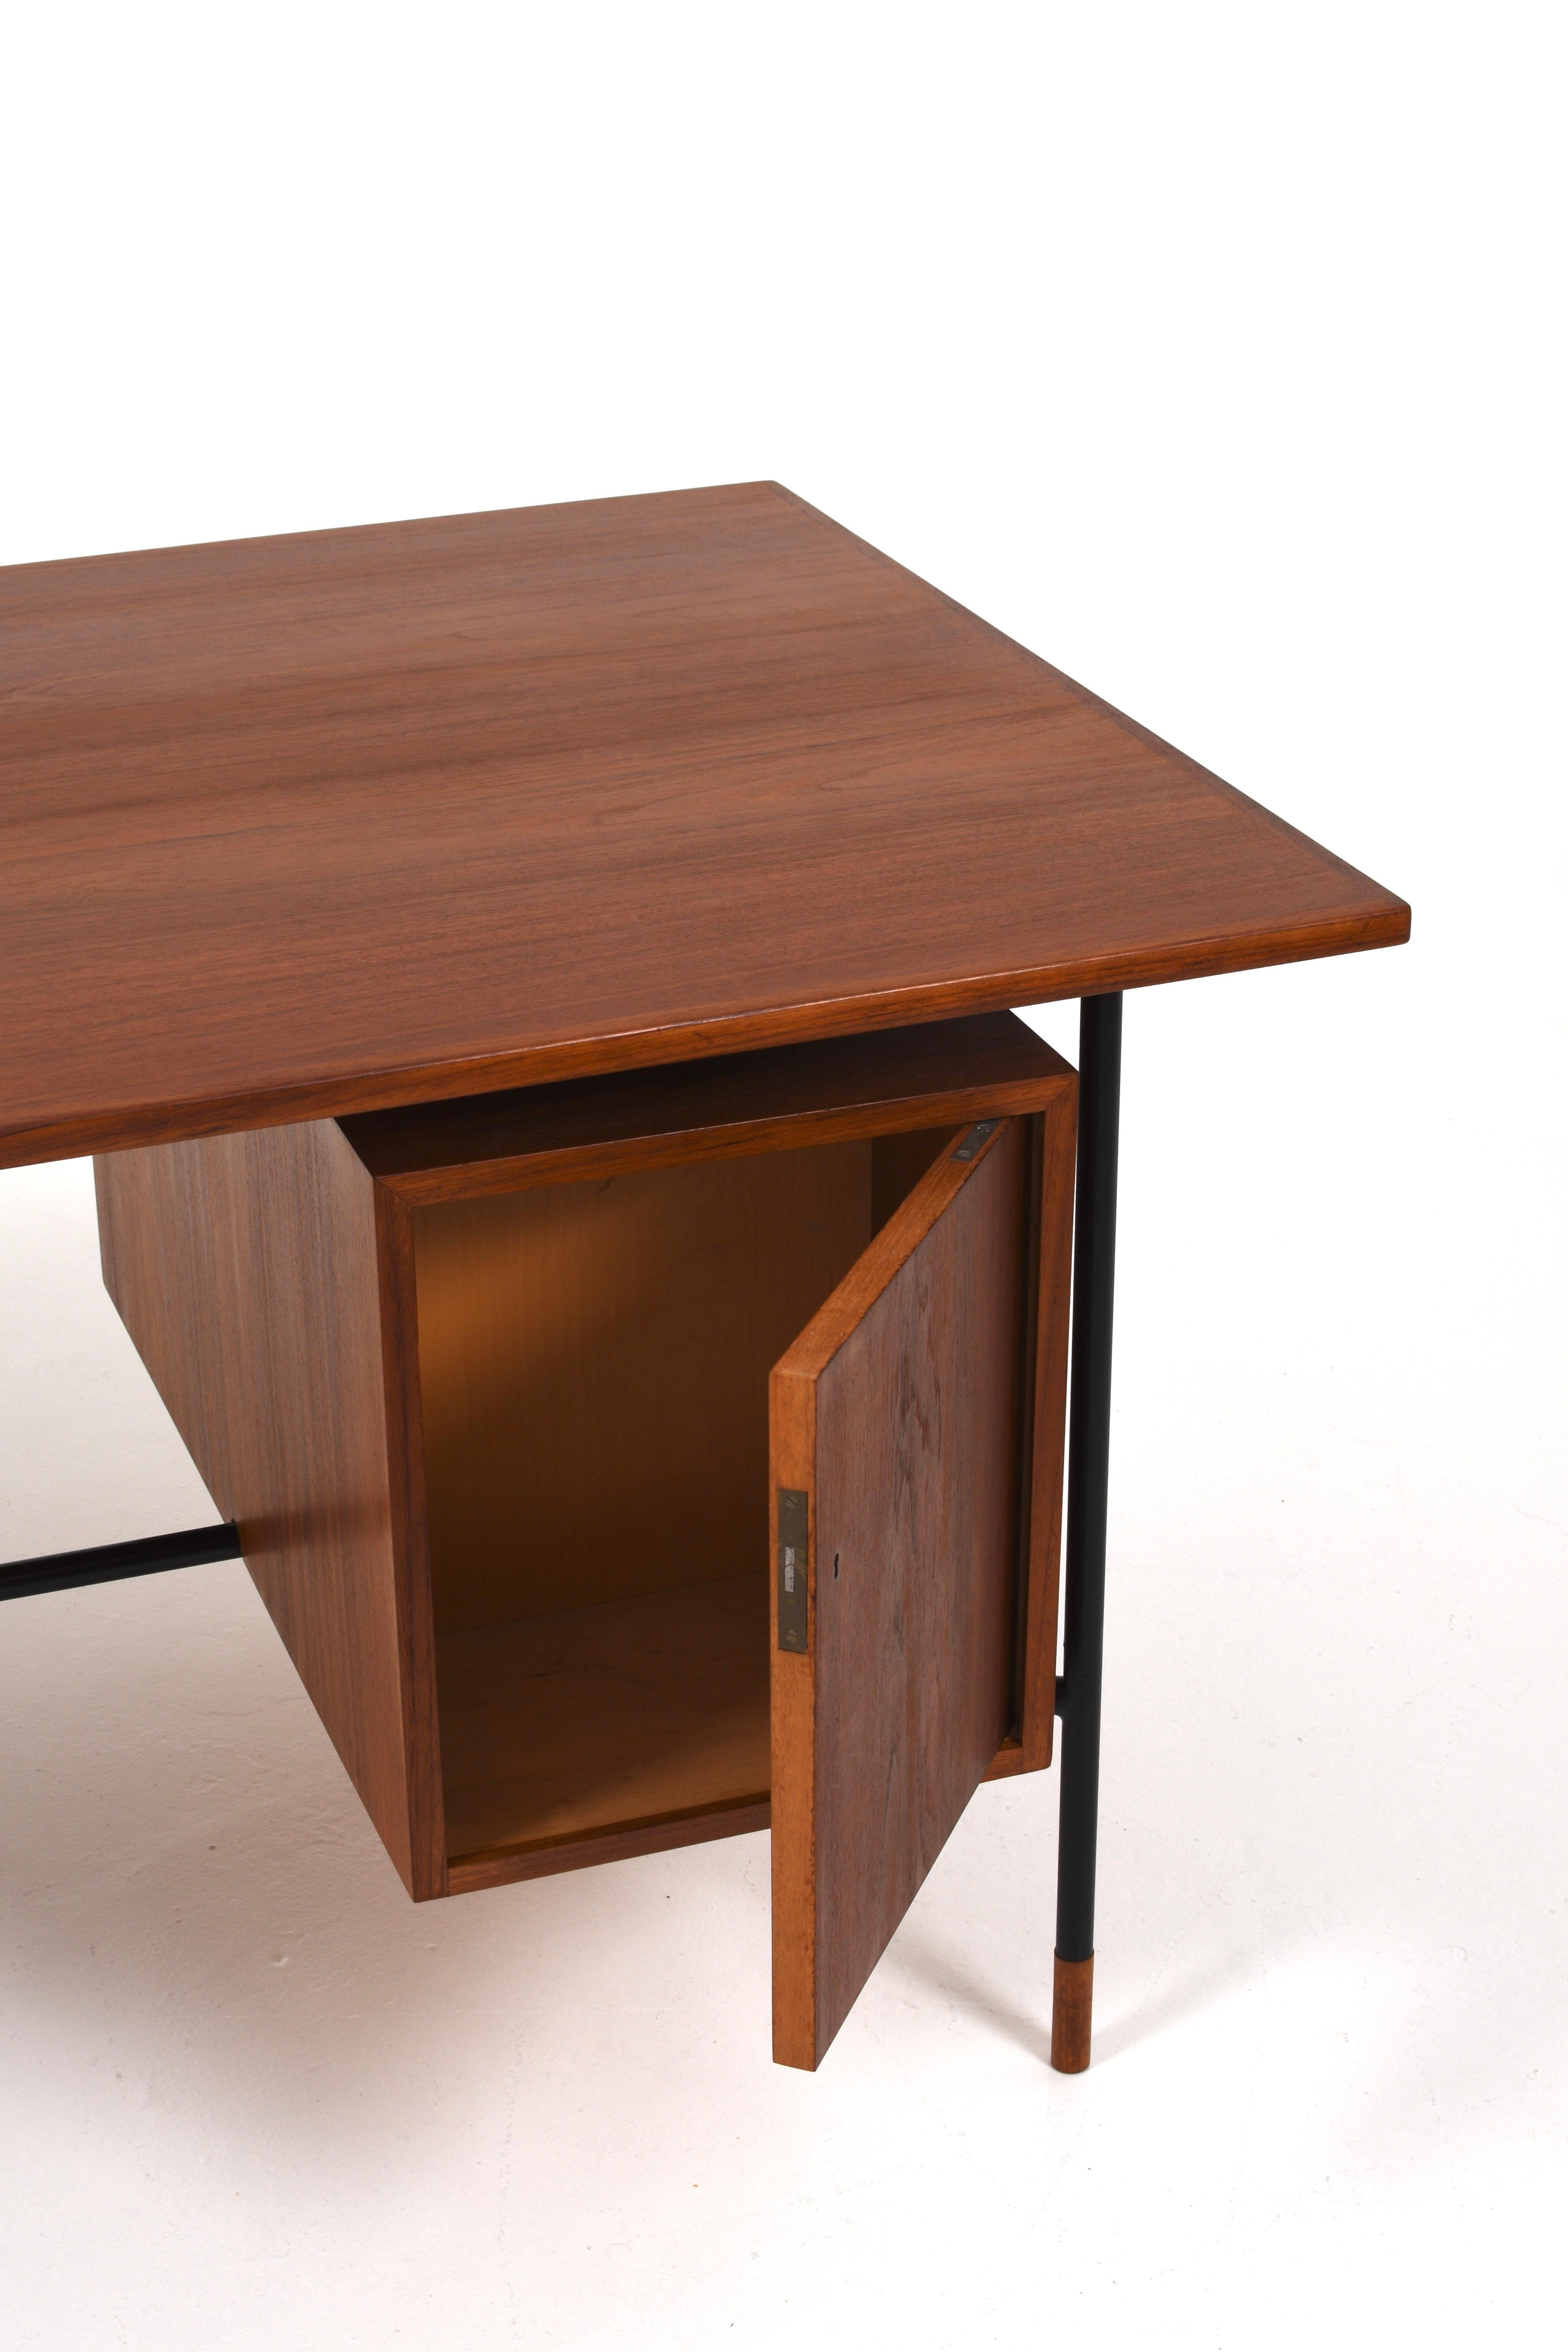 Steel Rare Desk H-55 by Åke Hassbjer in teak and steel base, 1950s For Sale